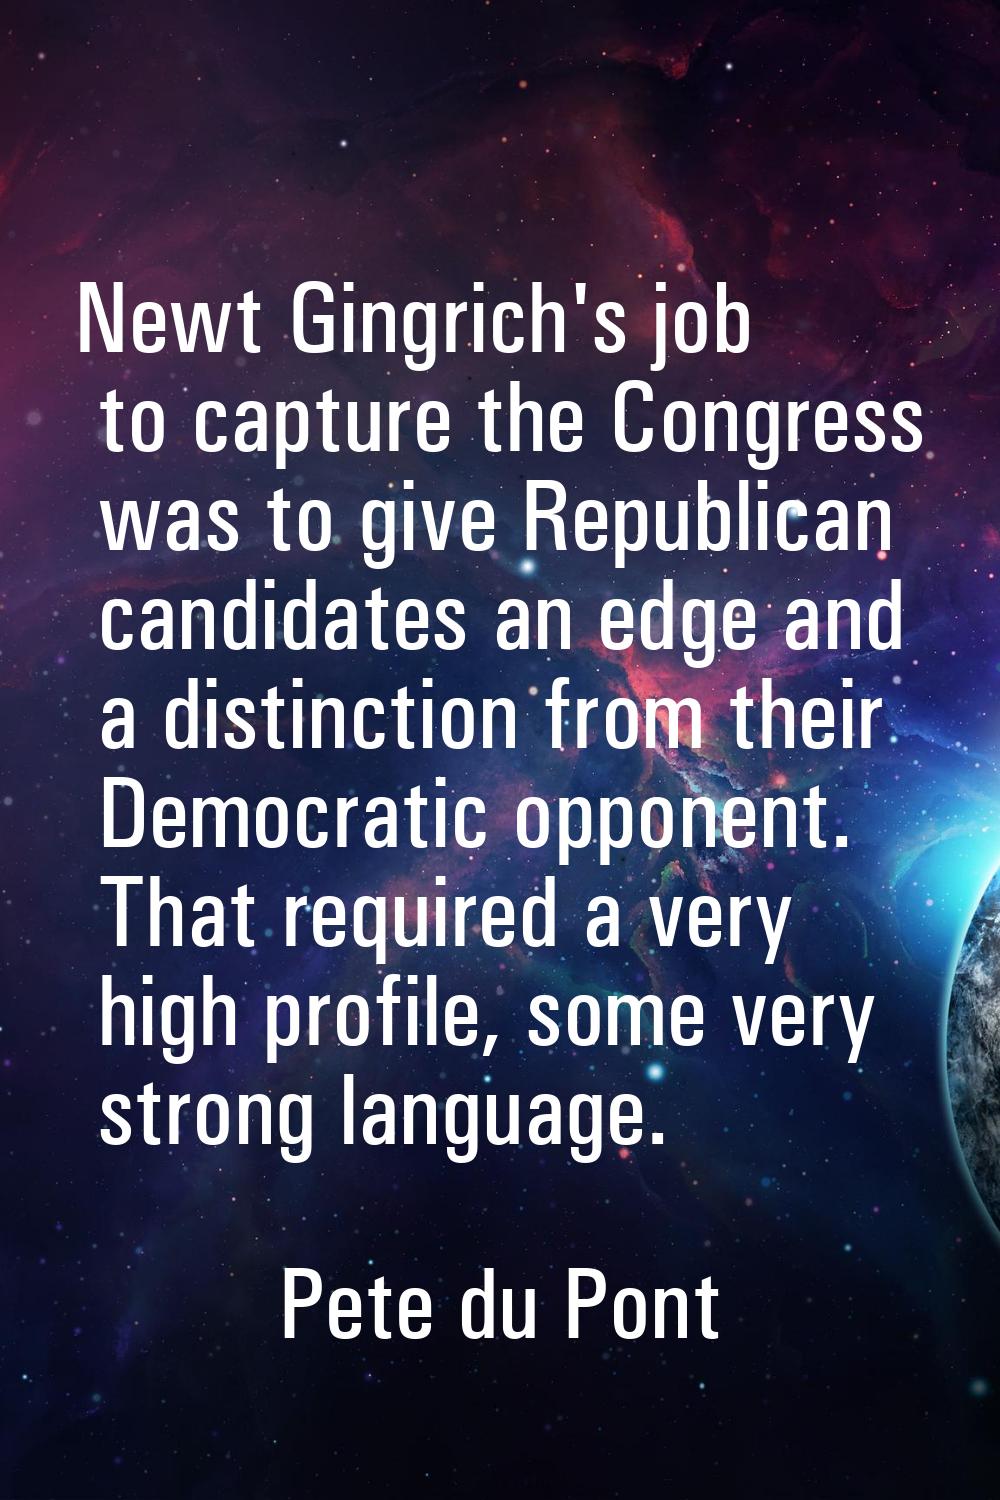 Newt Gingrich's job to capture the Congress was to give Republican candidates an edge and a distinc